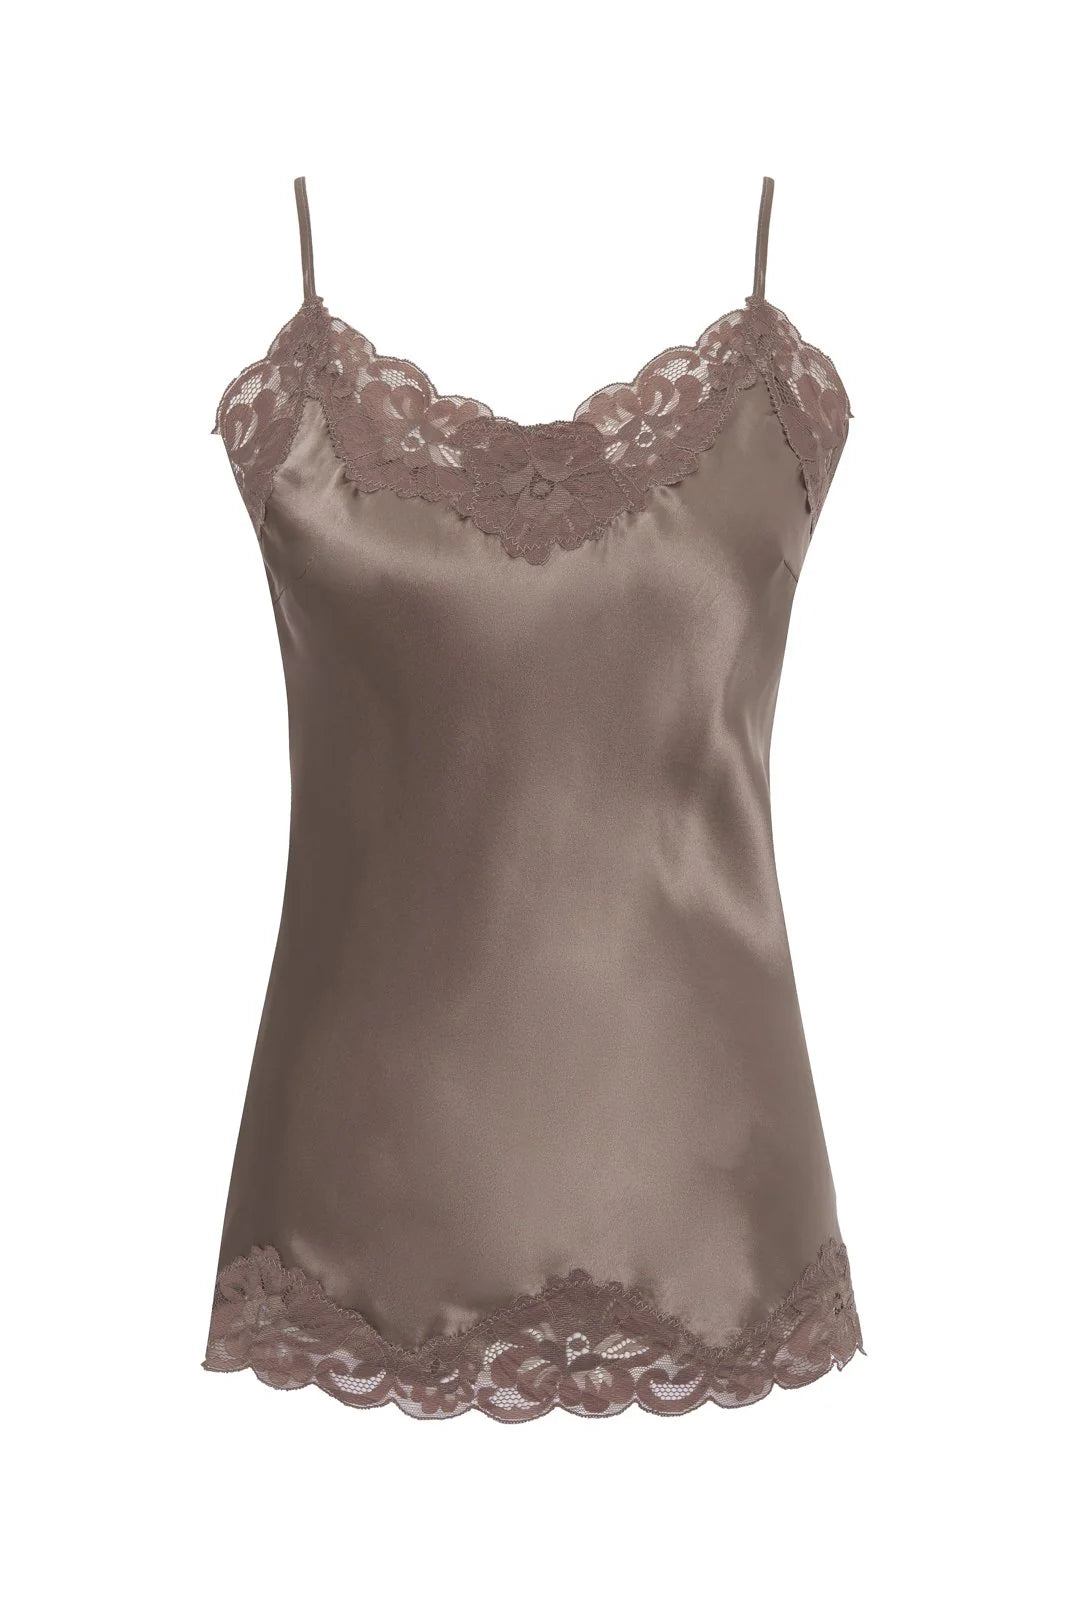 GOLD HAWK | Camie Floral Lace- Taupe